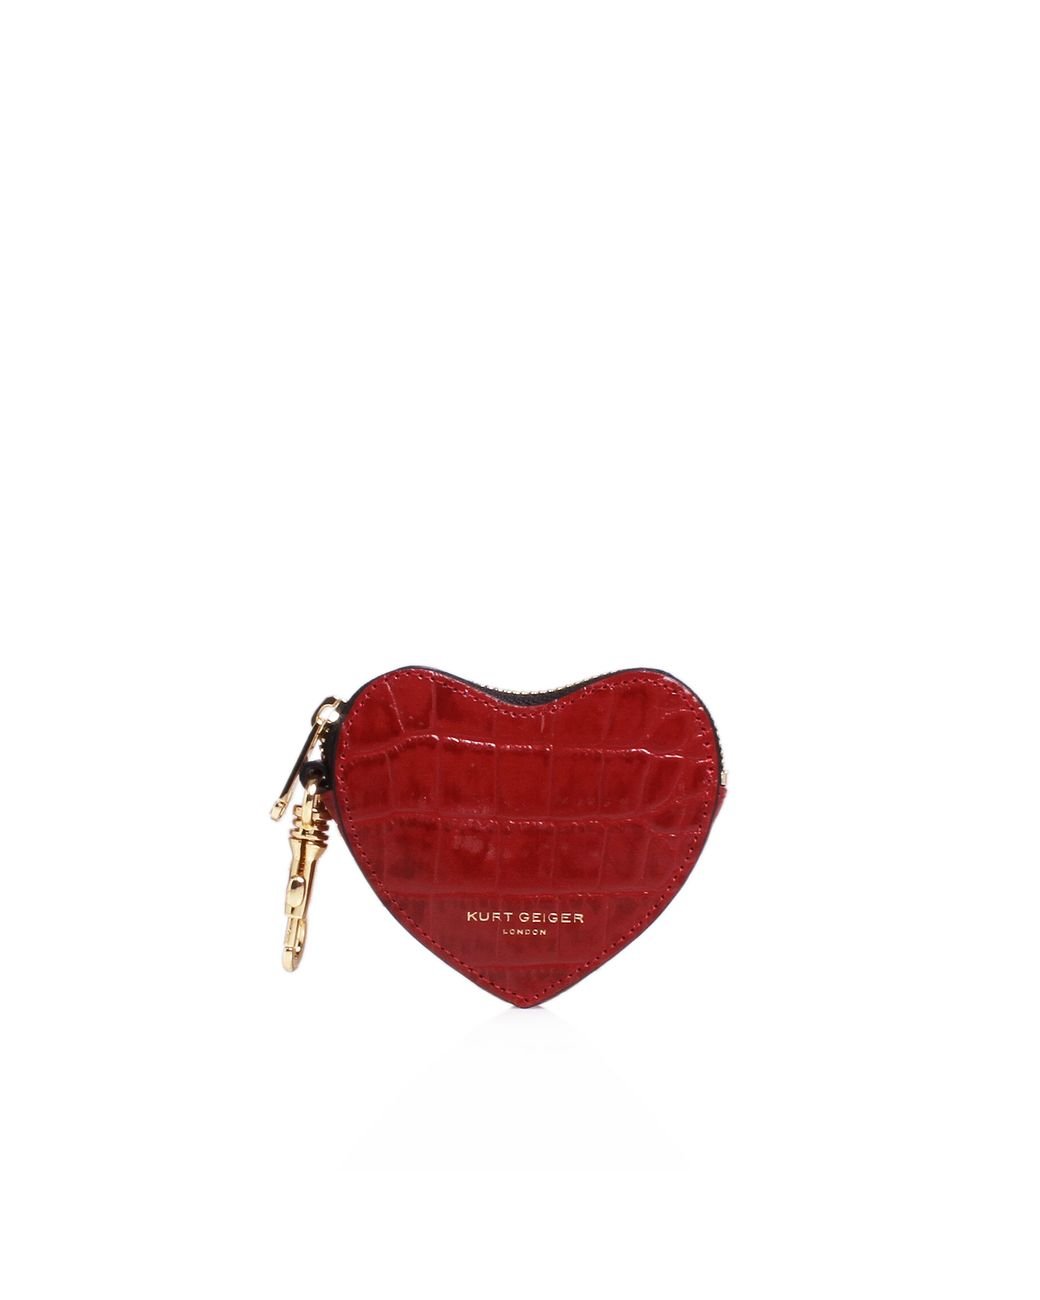 Kurt Geiger Heart Leather Purse in Red | Lyst Canada